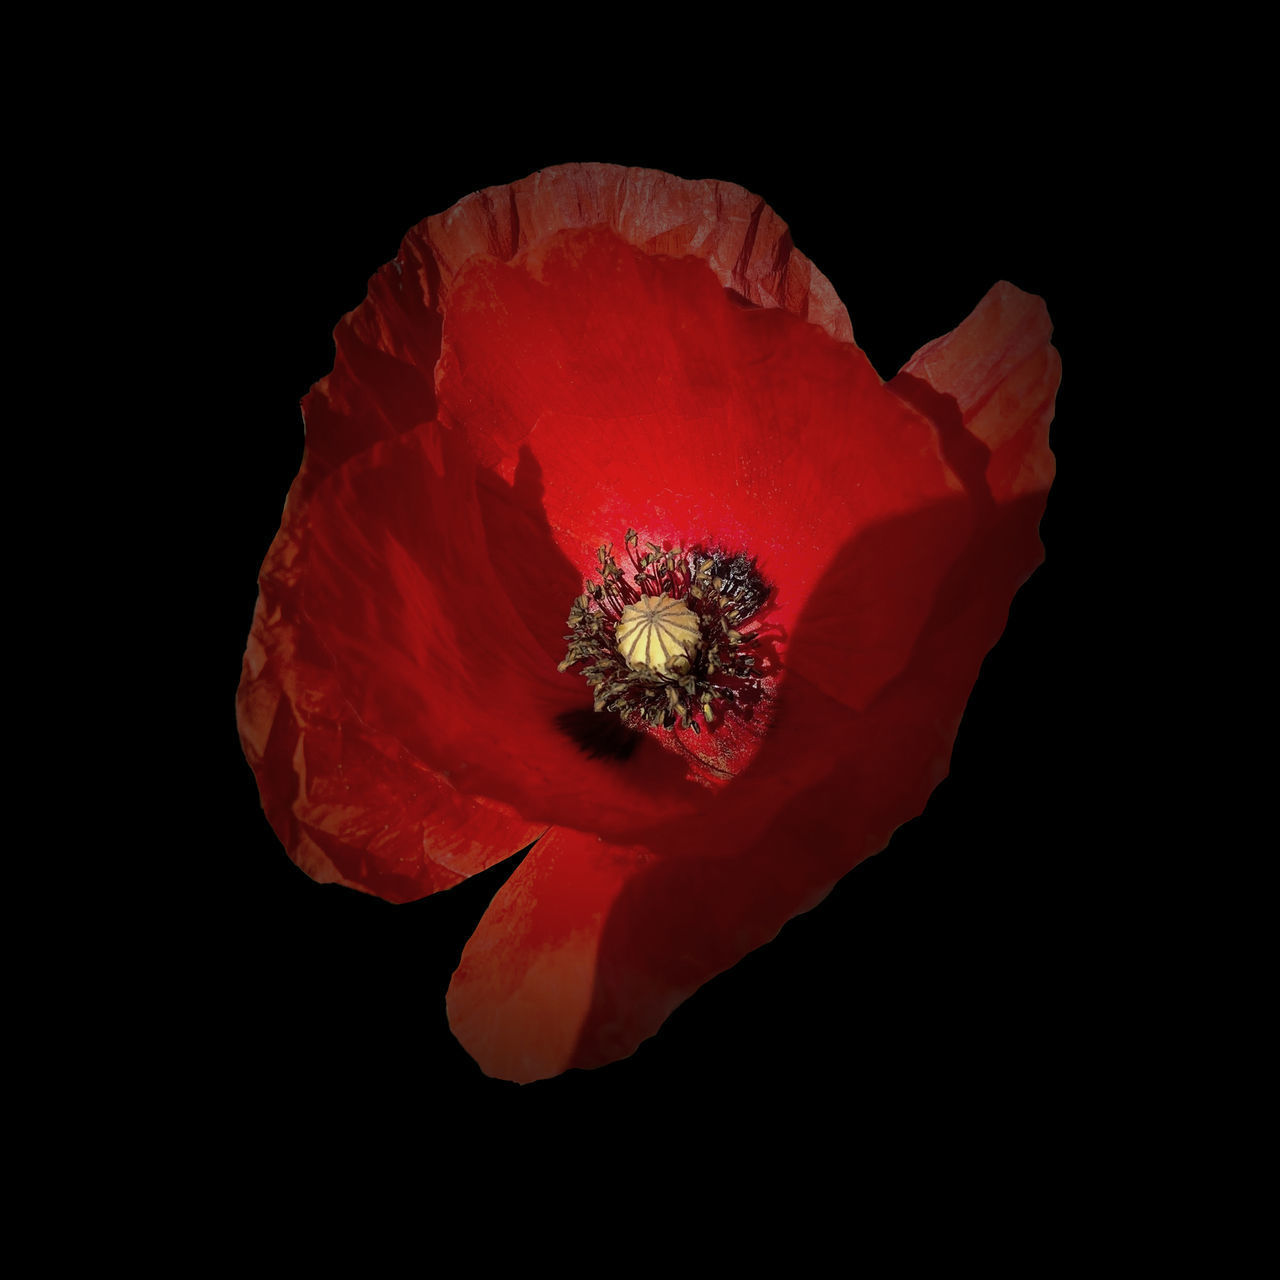 CLOSE-UP OF RED POPPY OVER BLACK BACKGROUND